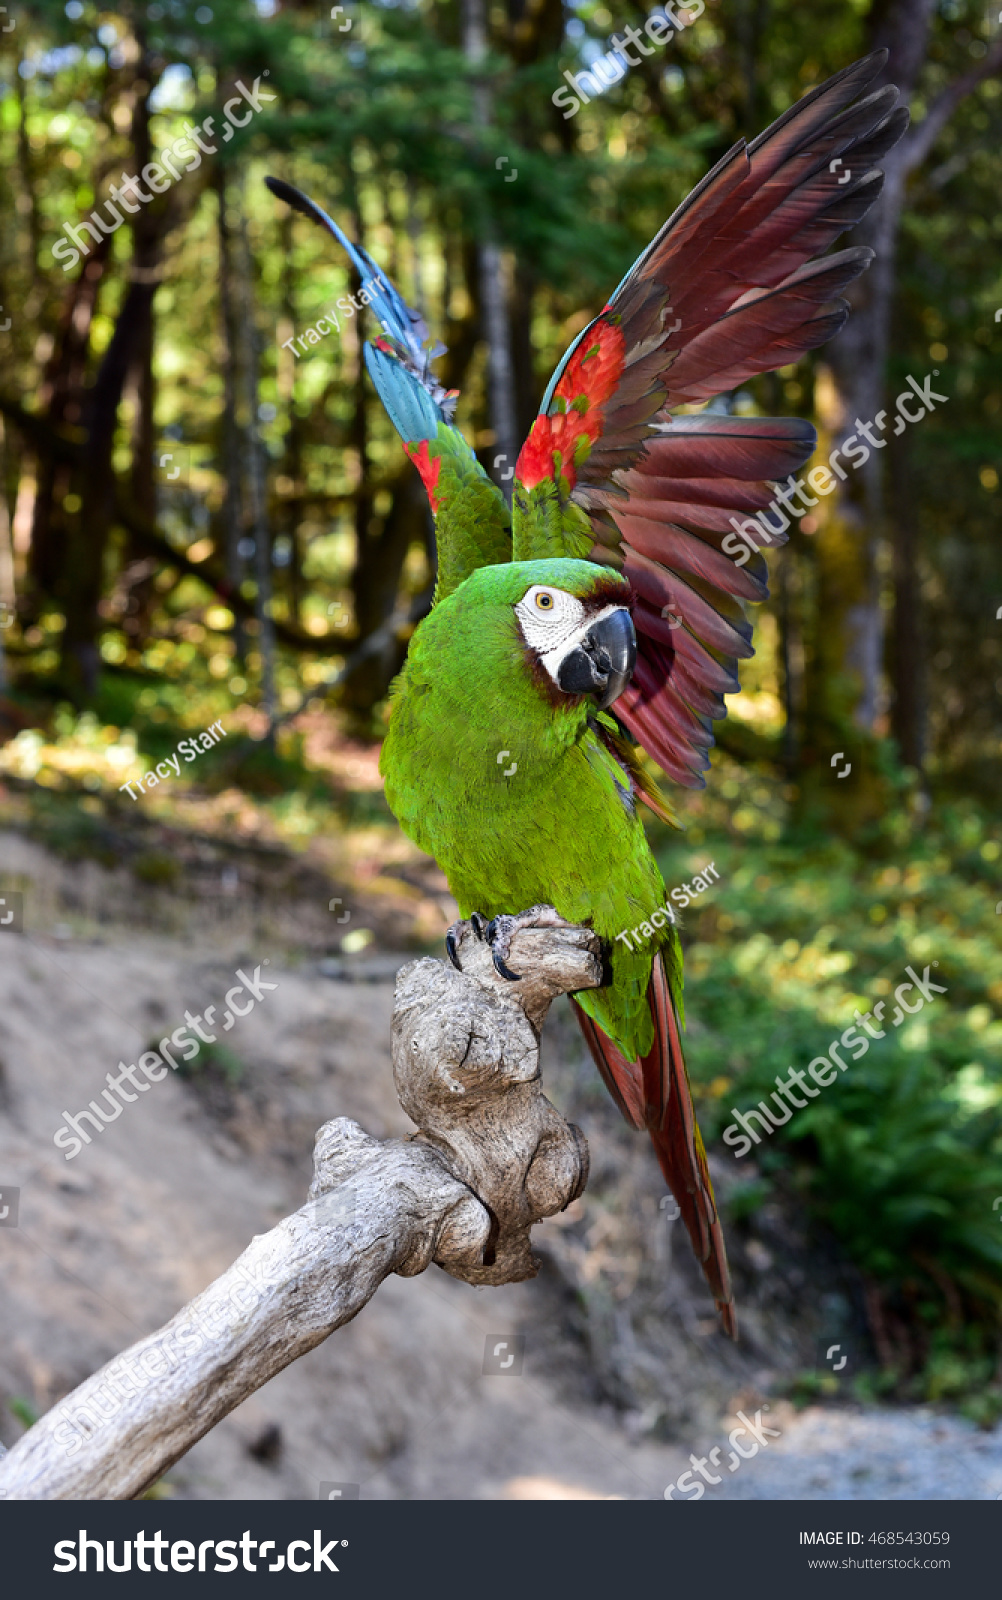 Severe Macaw Parrot Stock Photo Edit Now 468543059,How To Play Gin Rummy Card Game